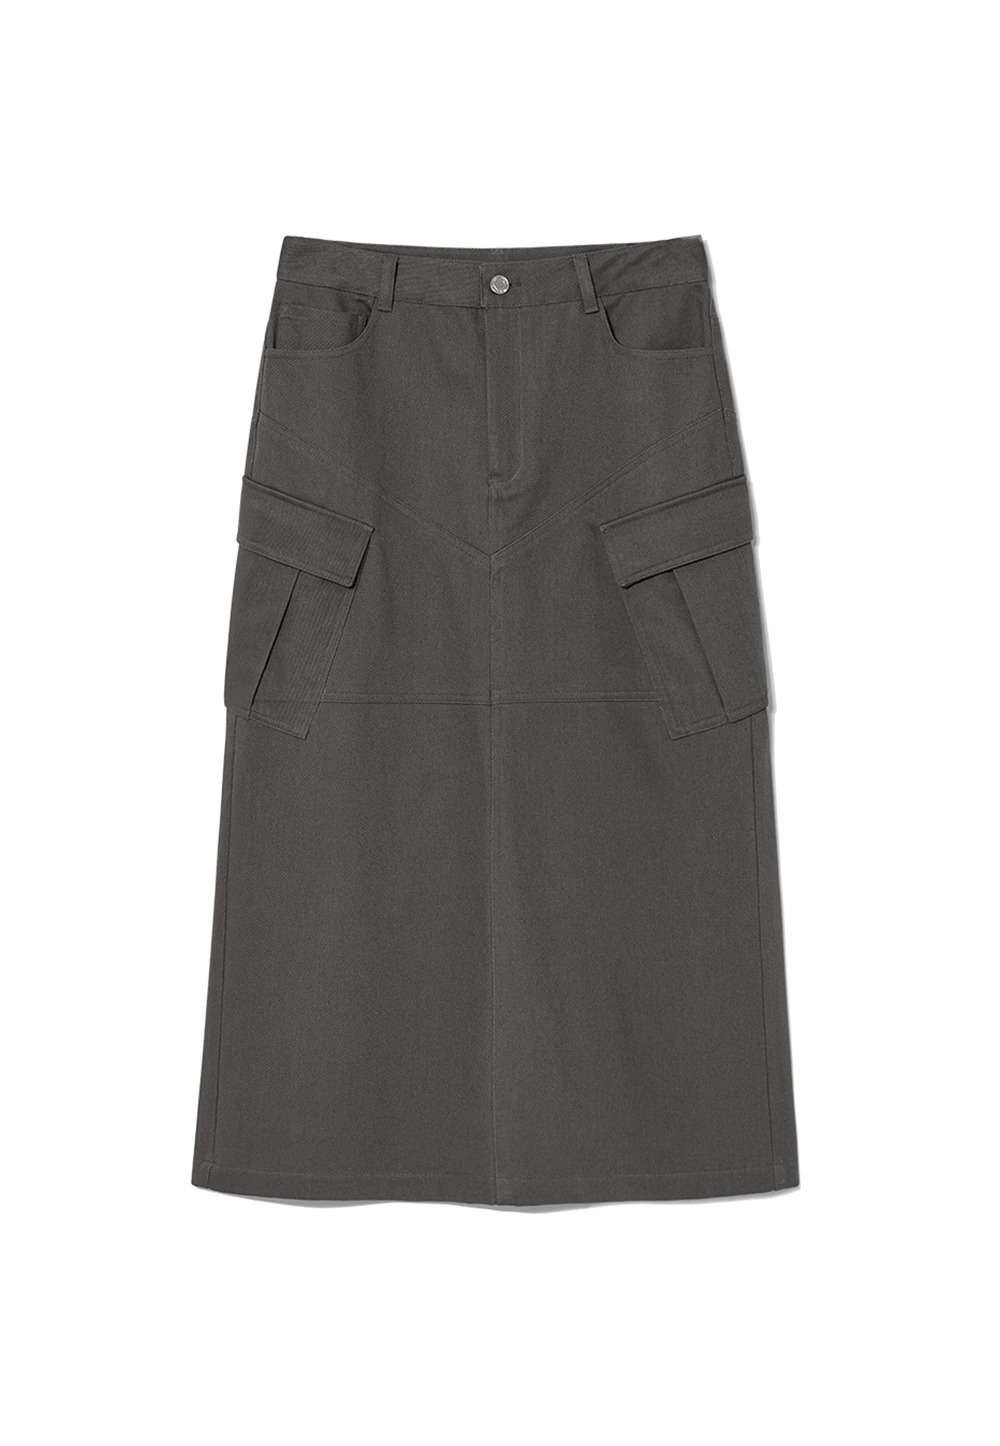 Daily cargo maxi skirt - CHARCOAL